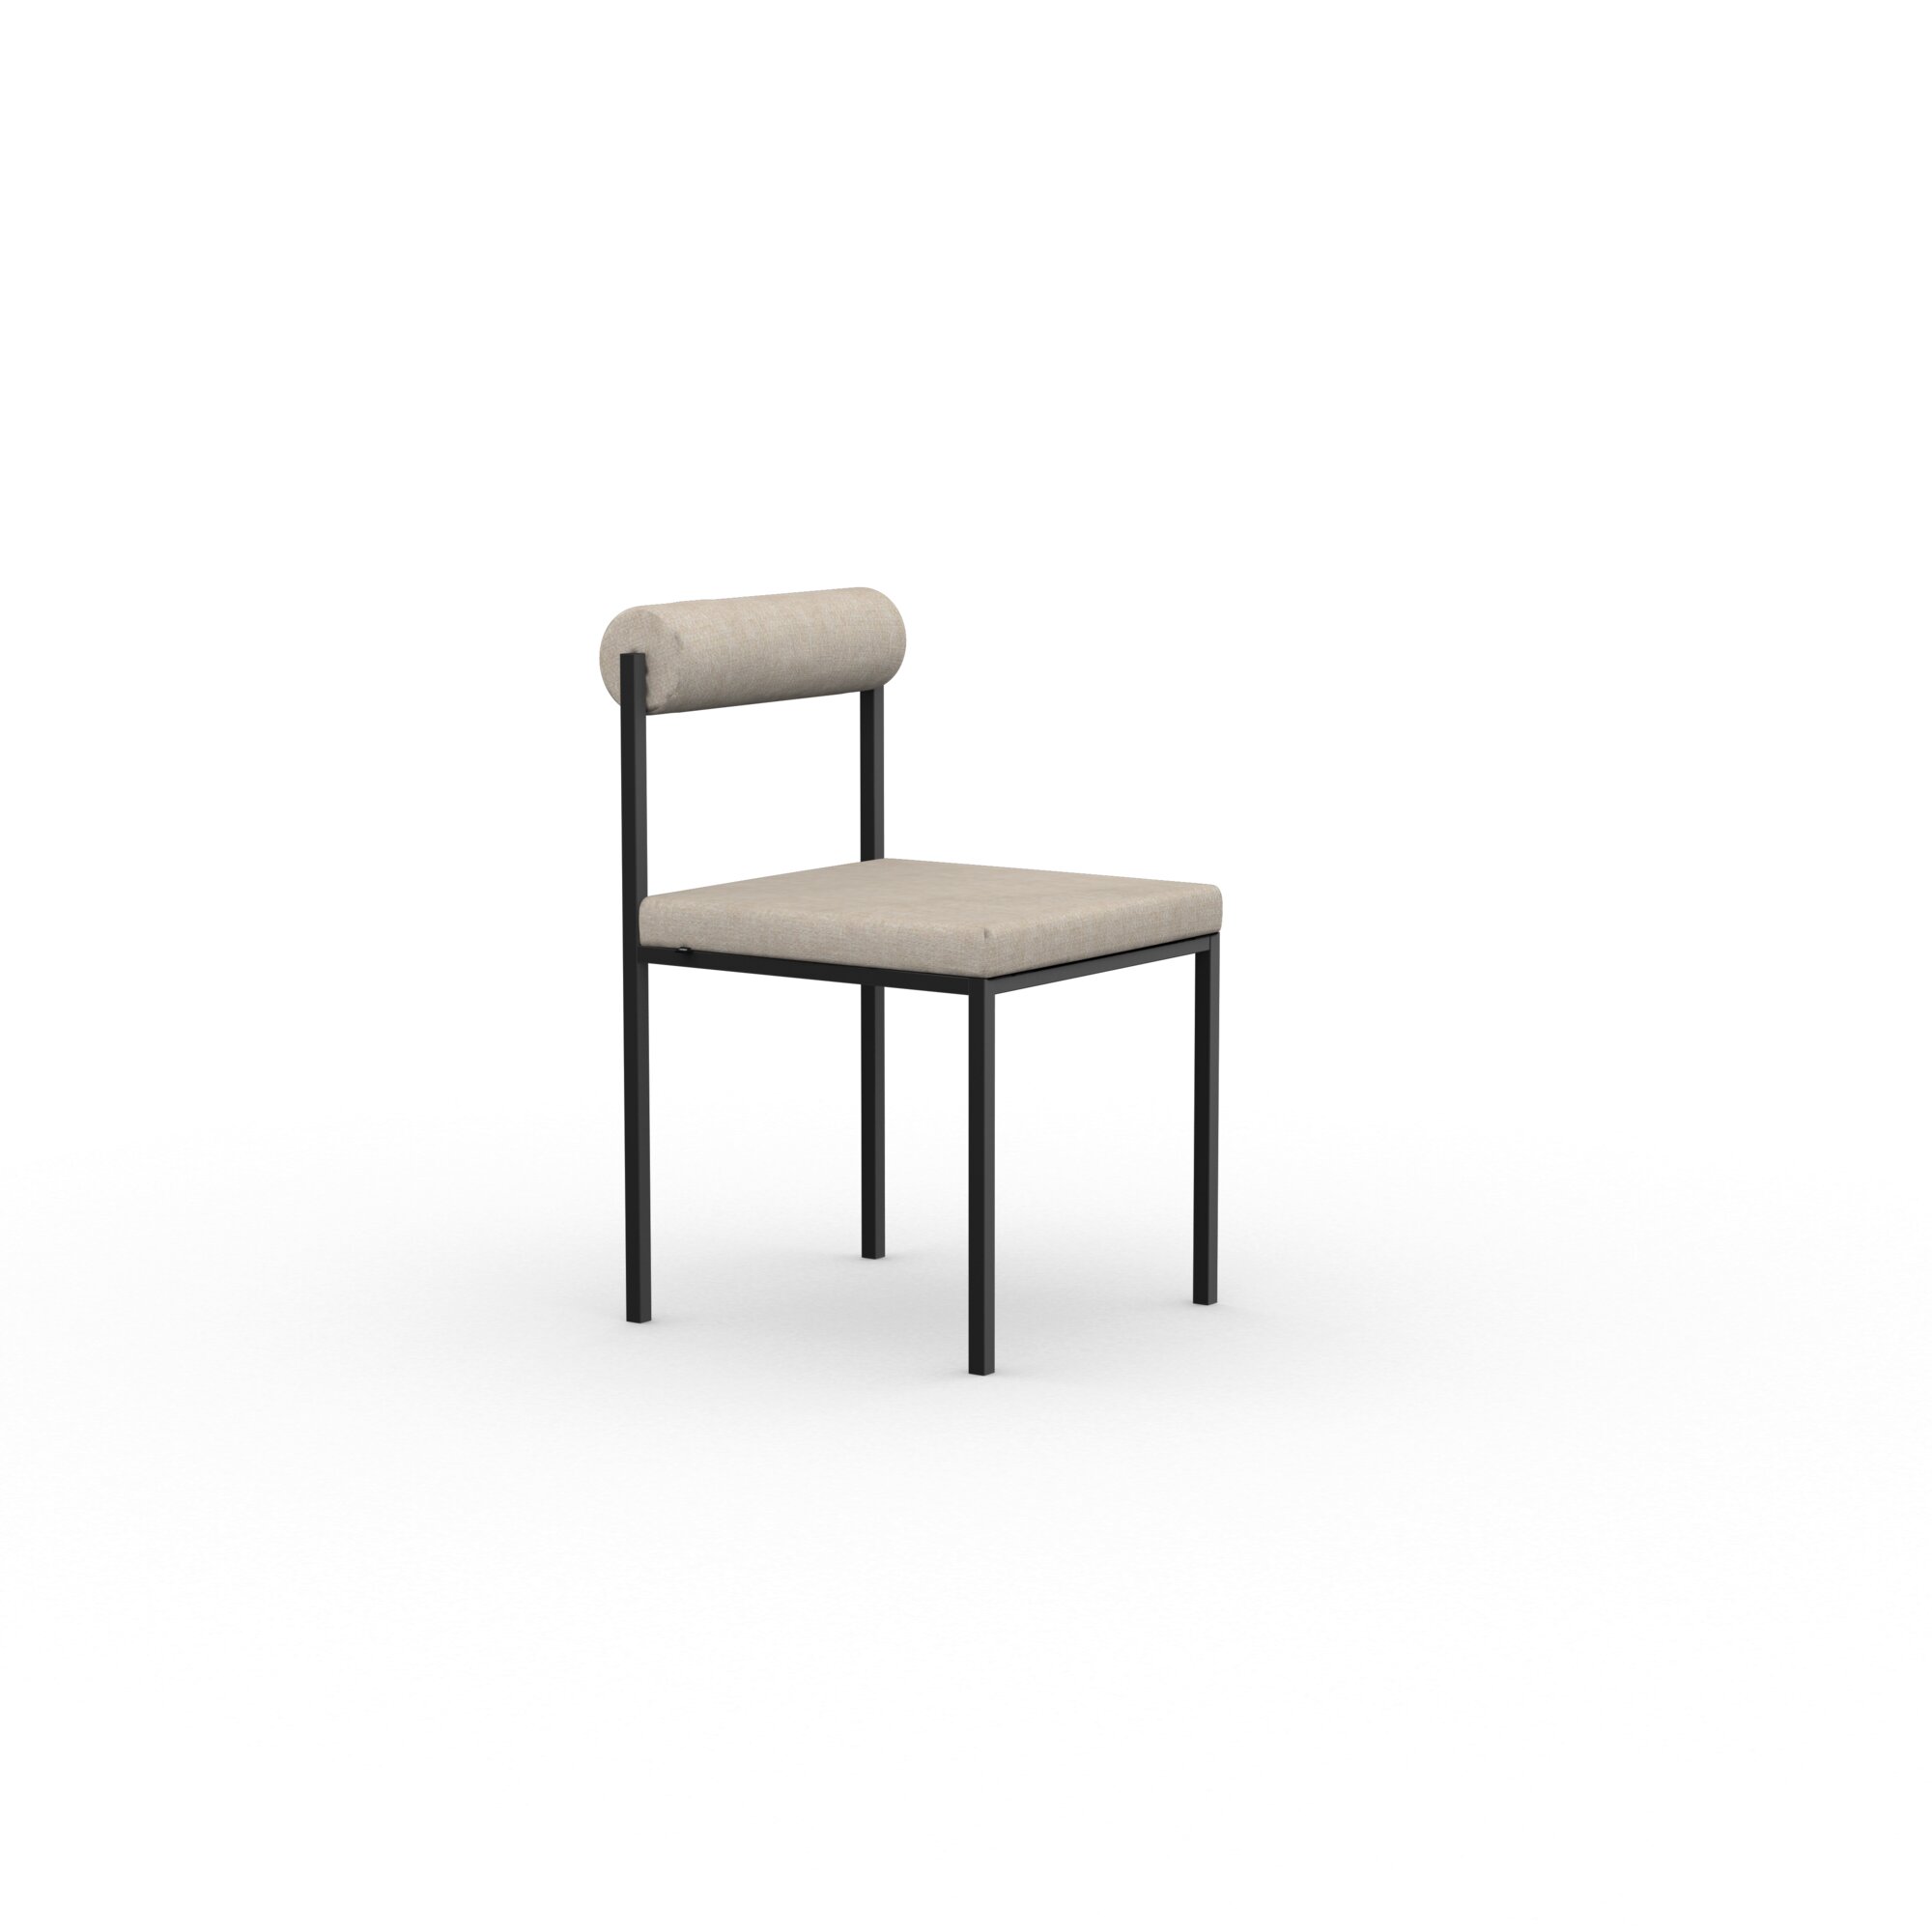 Design modern dining chair | Bolster Dining Chair without armrest Beige orion cream02 | Studio HENK| 